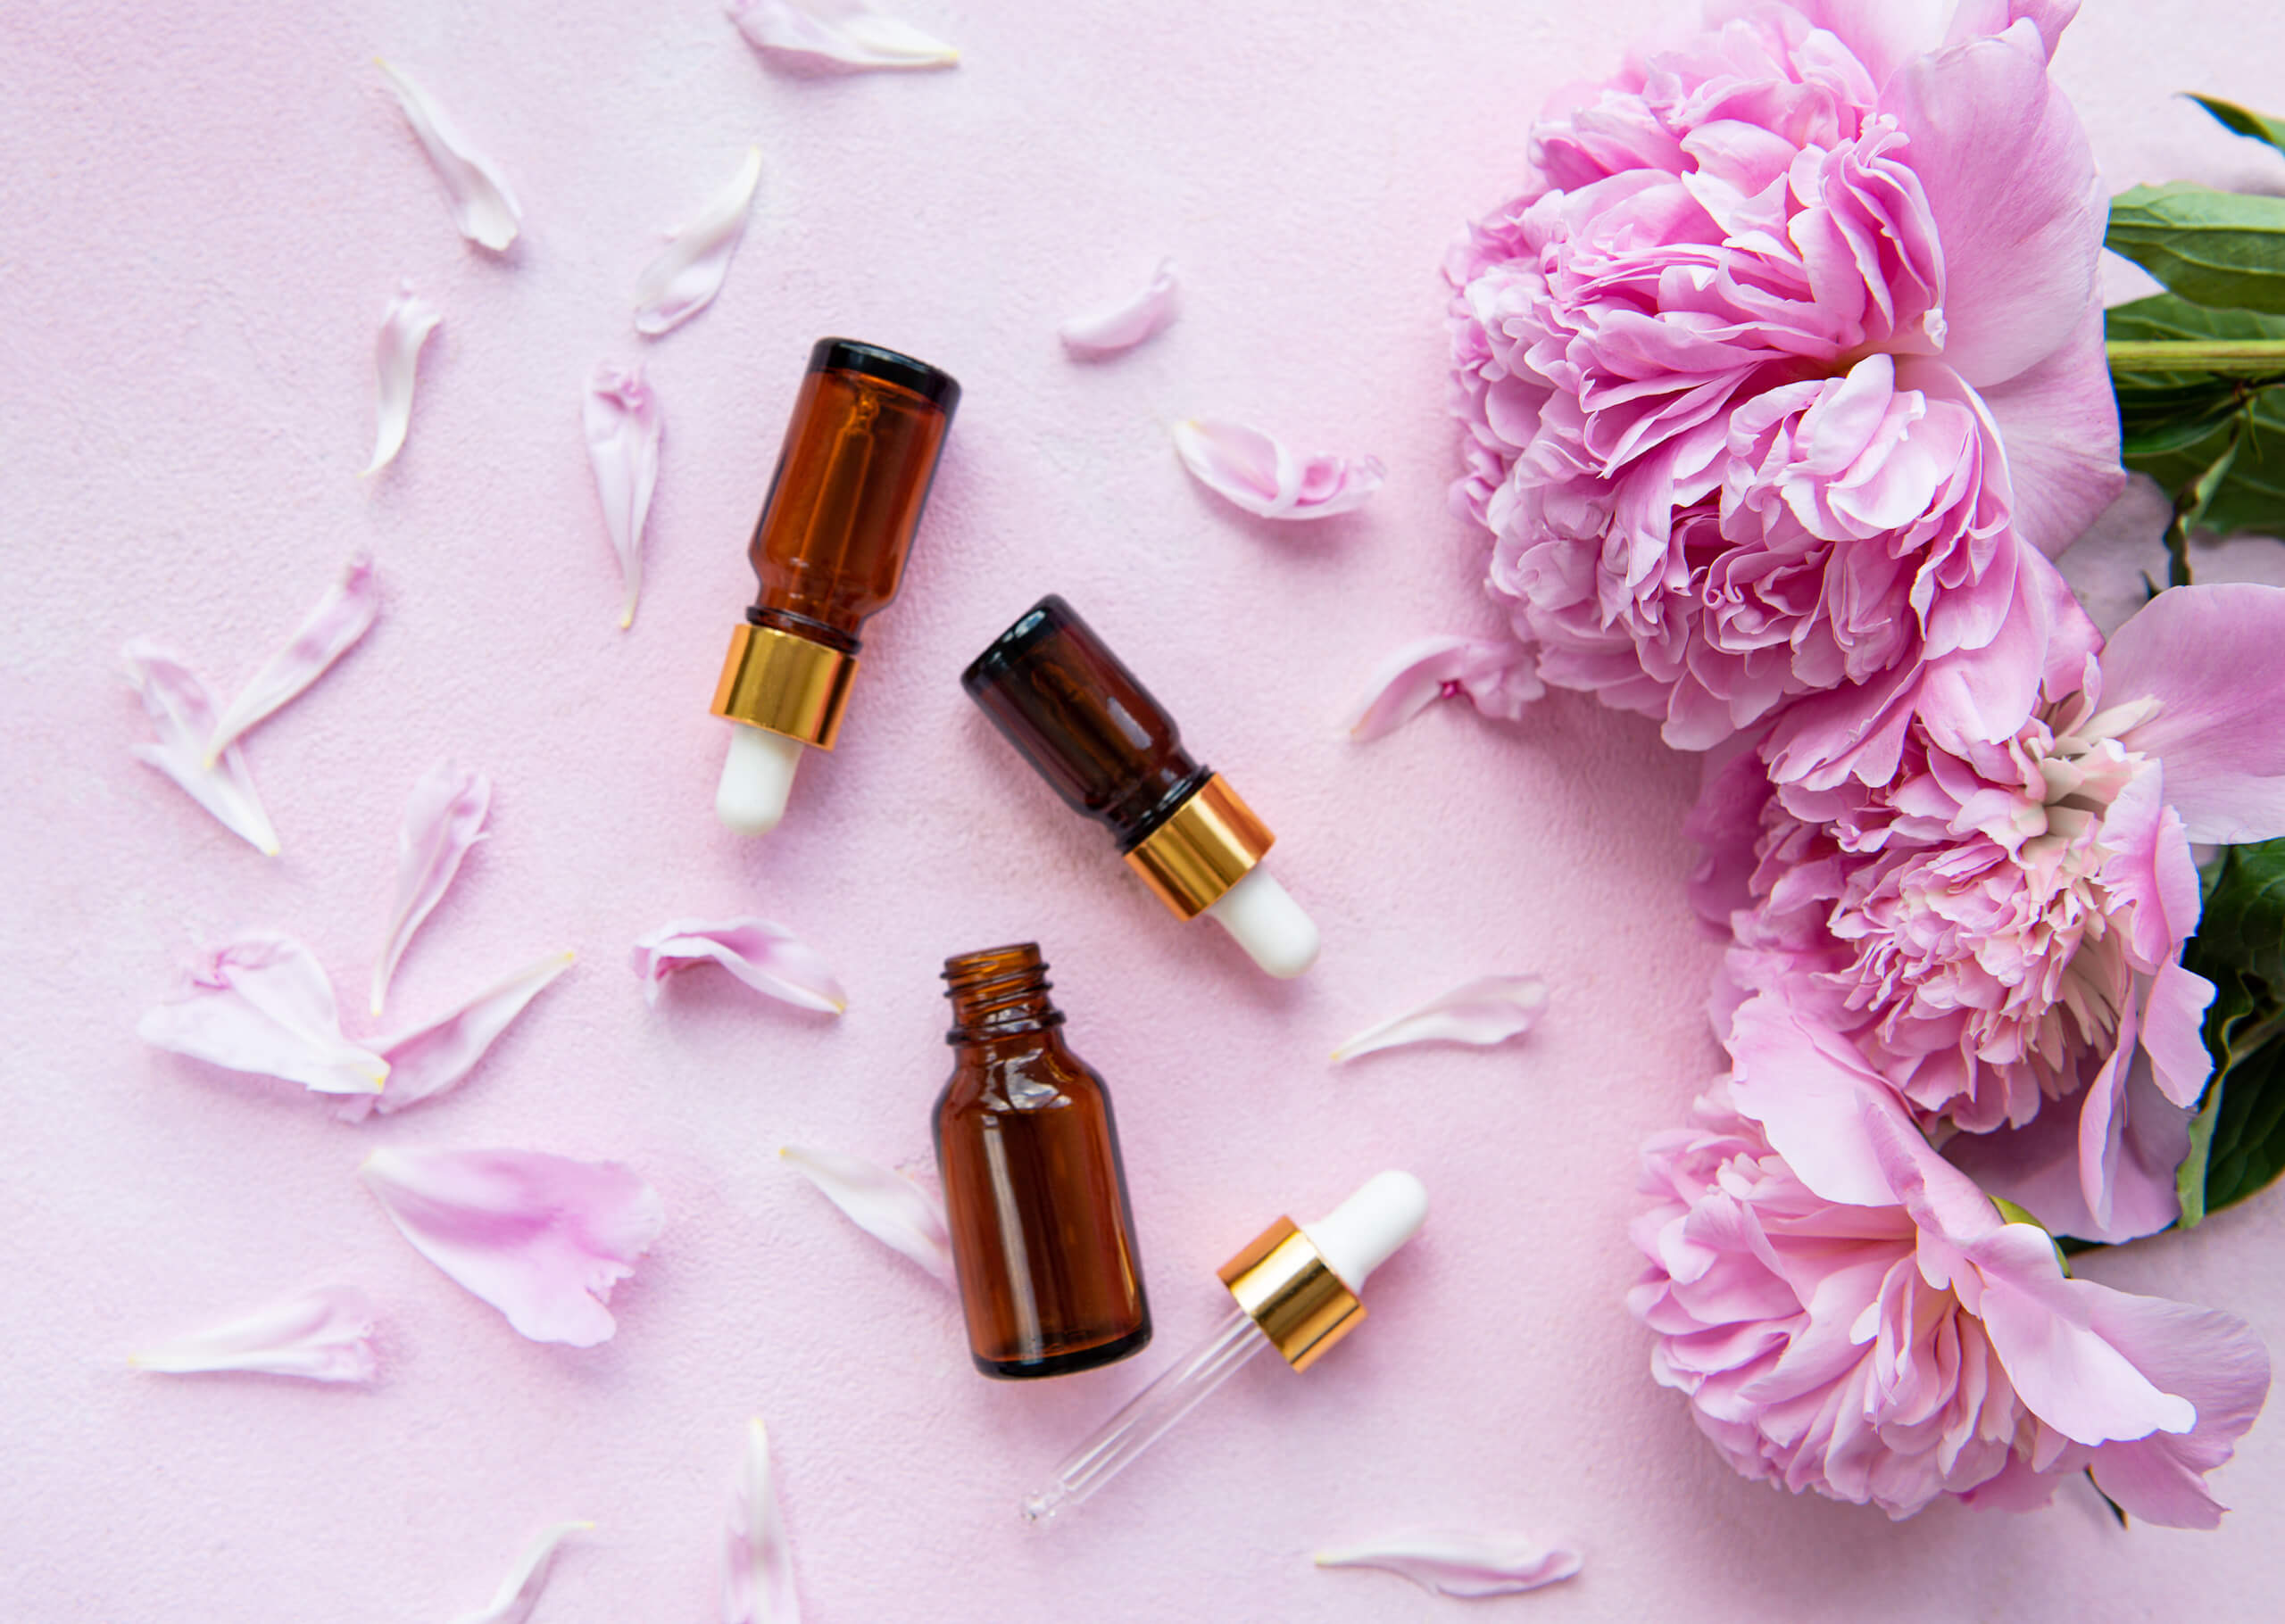 5 Essential Oils to Boost Your Mood and Energy